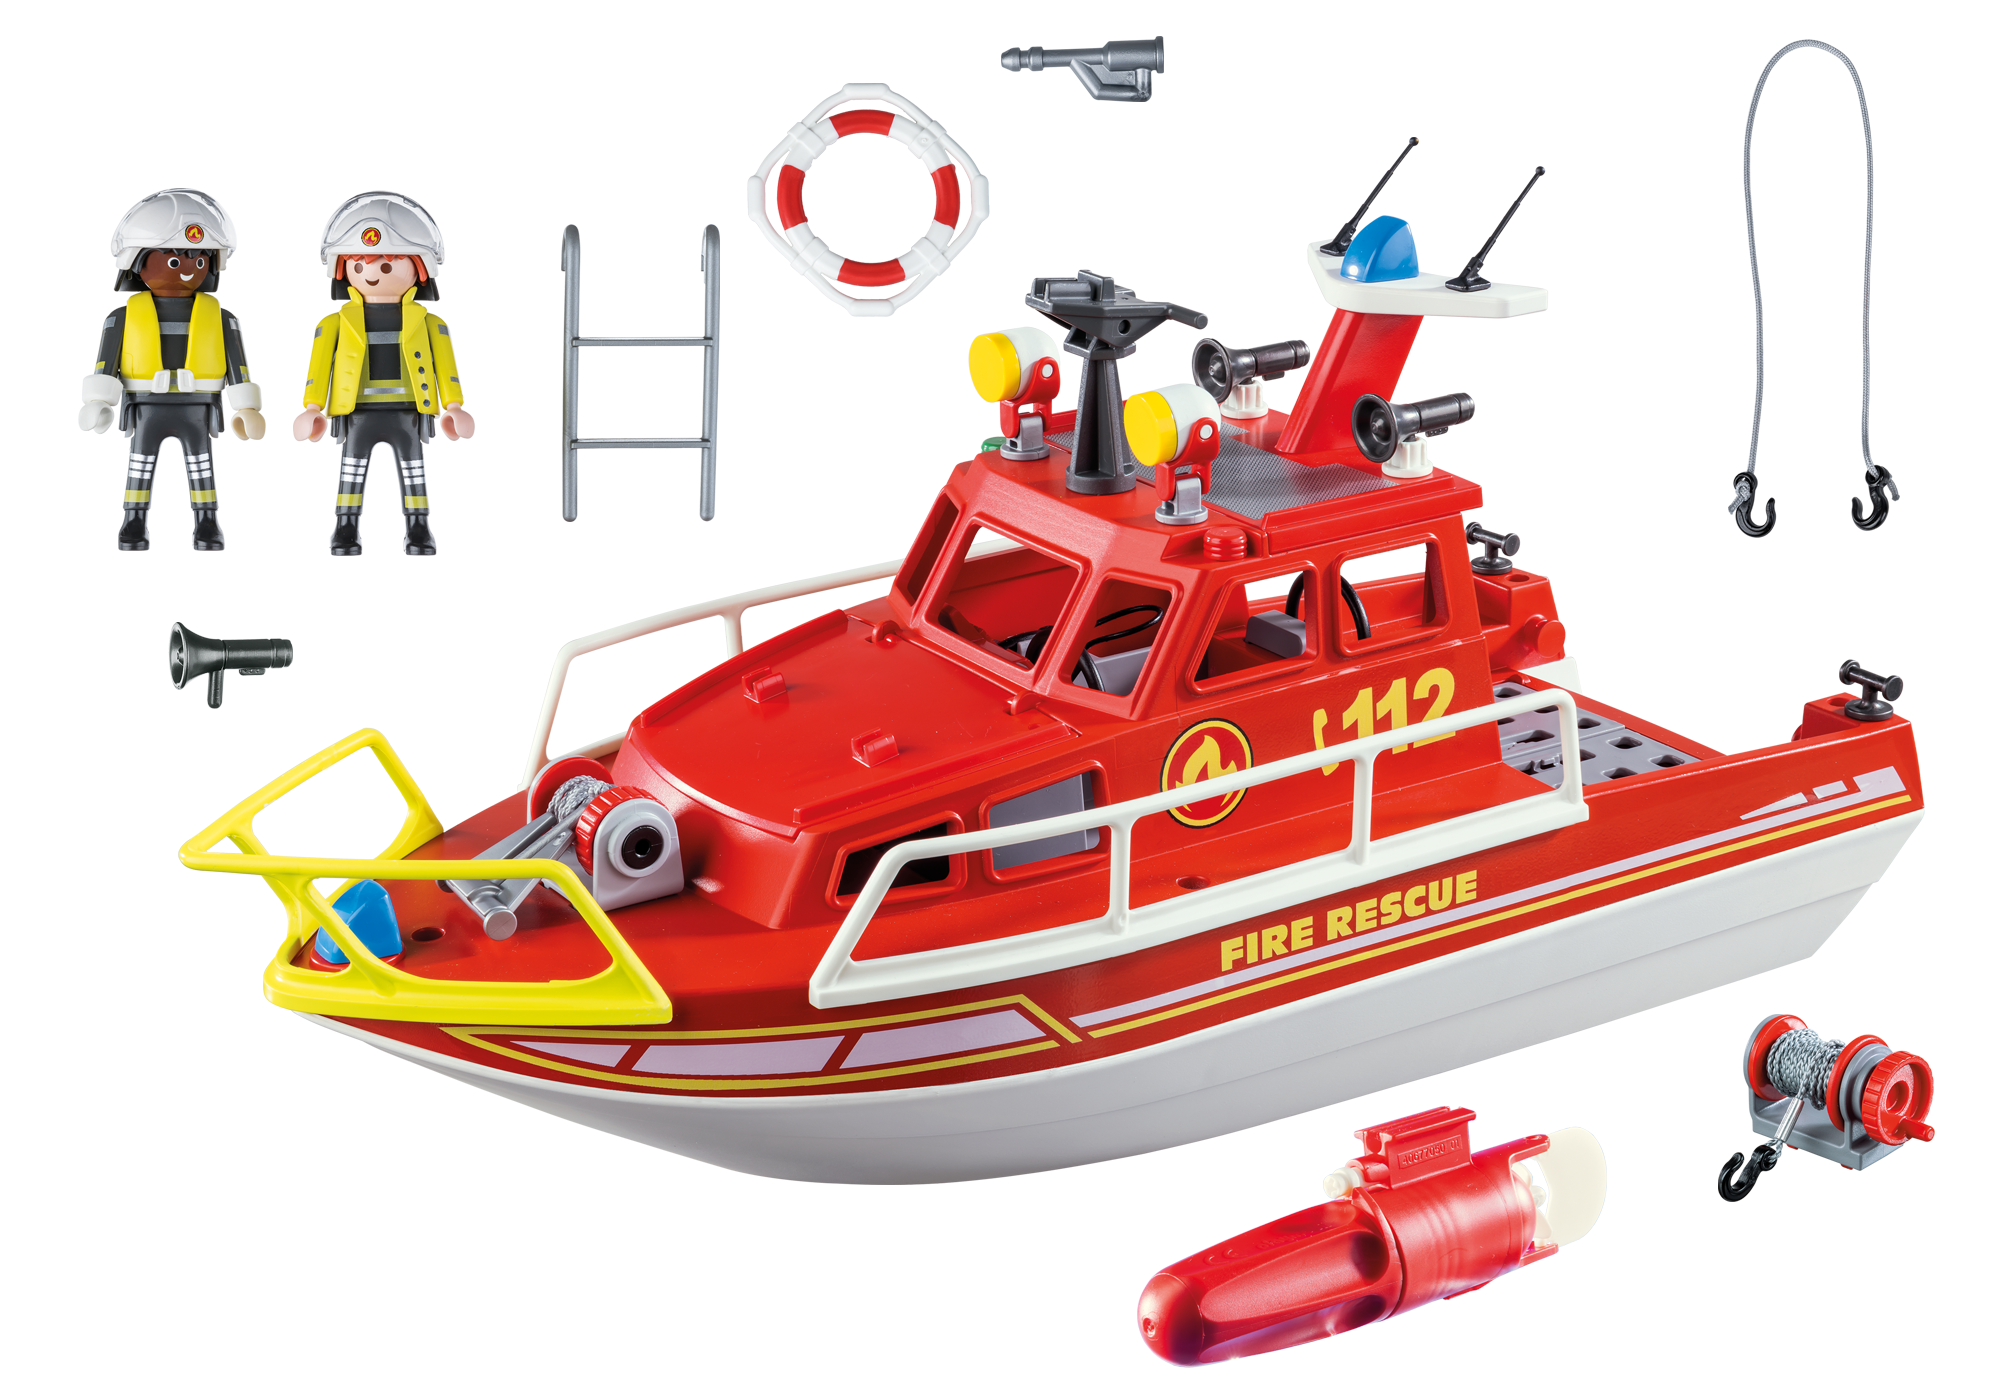 playmobil rescue boat